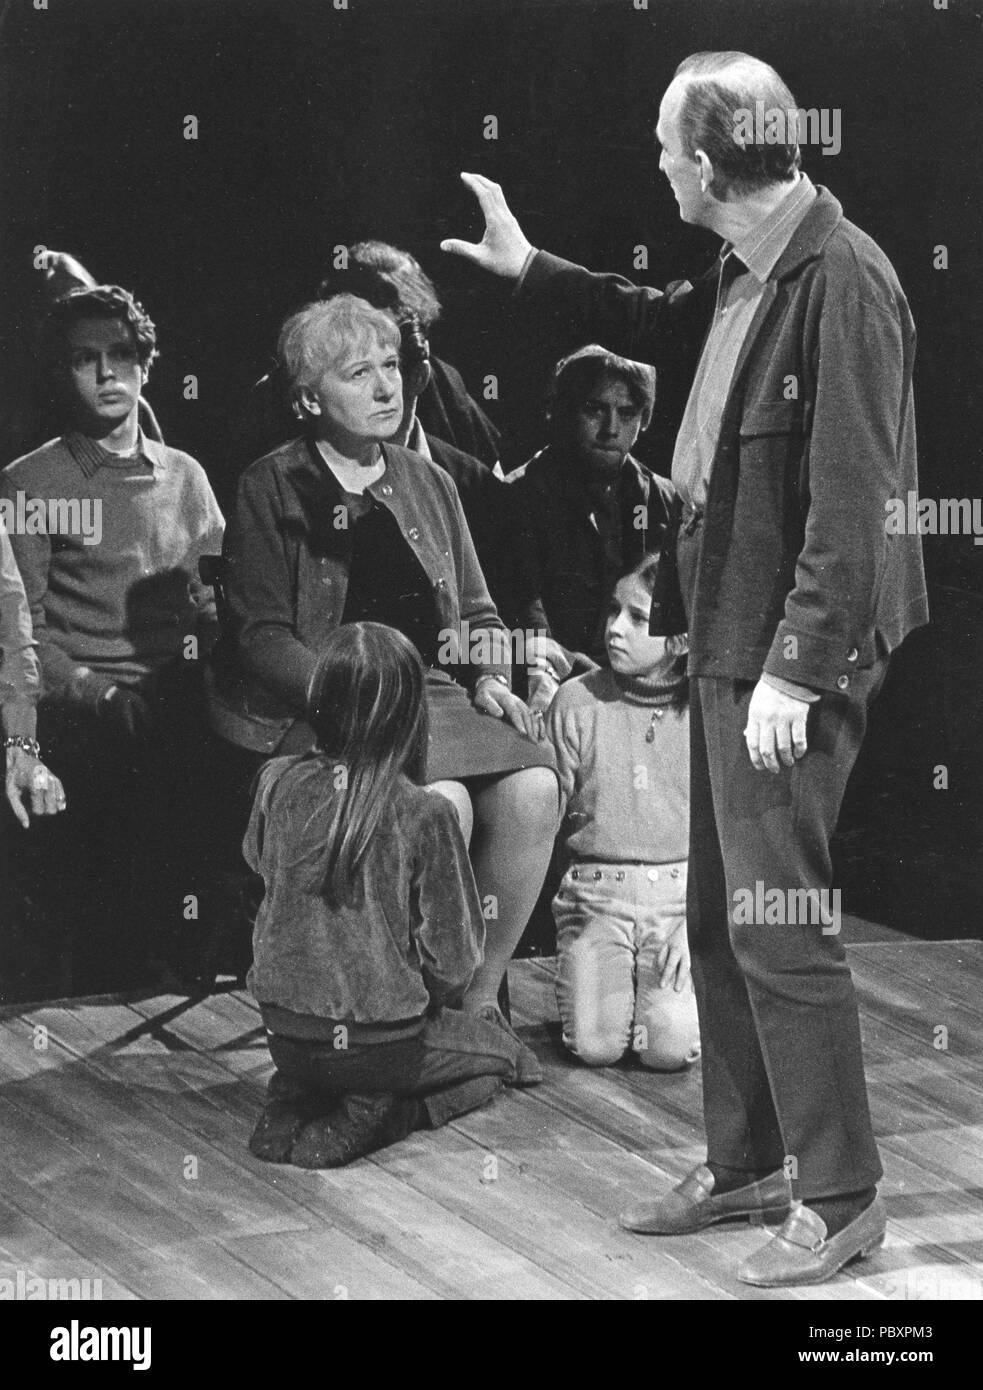 Ingmar Bergman. 1918-2007.  Swedish film director. Pictured here 1969 directing actress Sif Ruud in a theatre production. Stock Photo